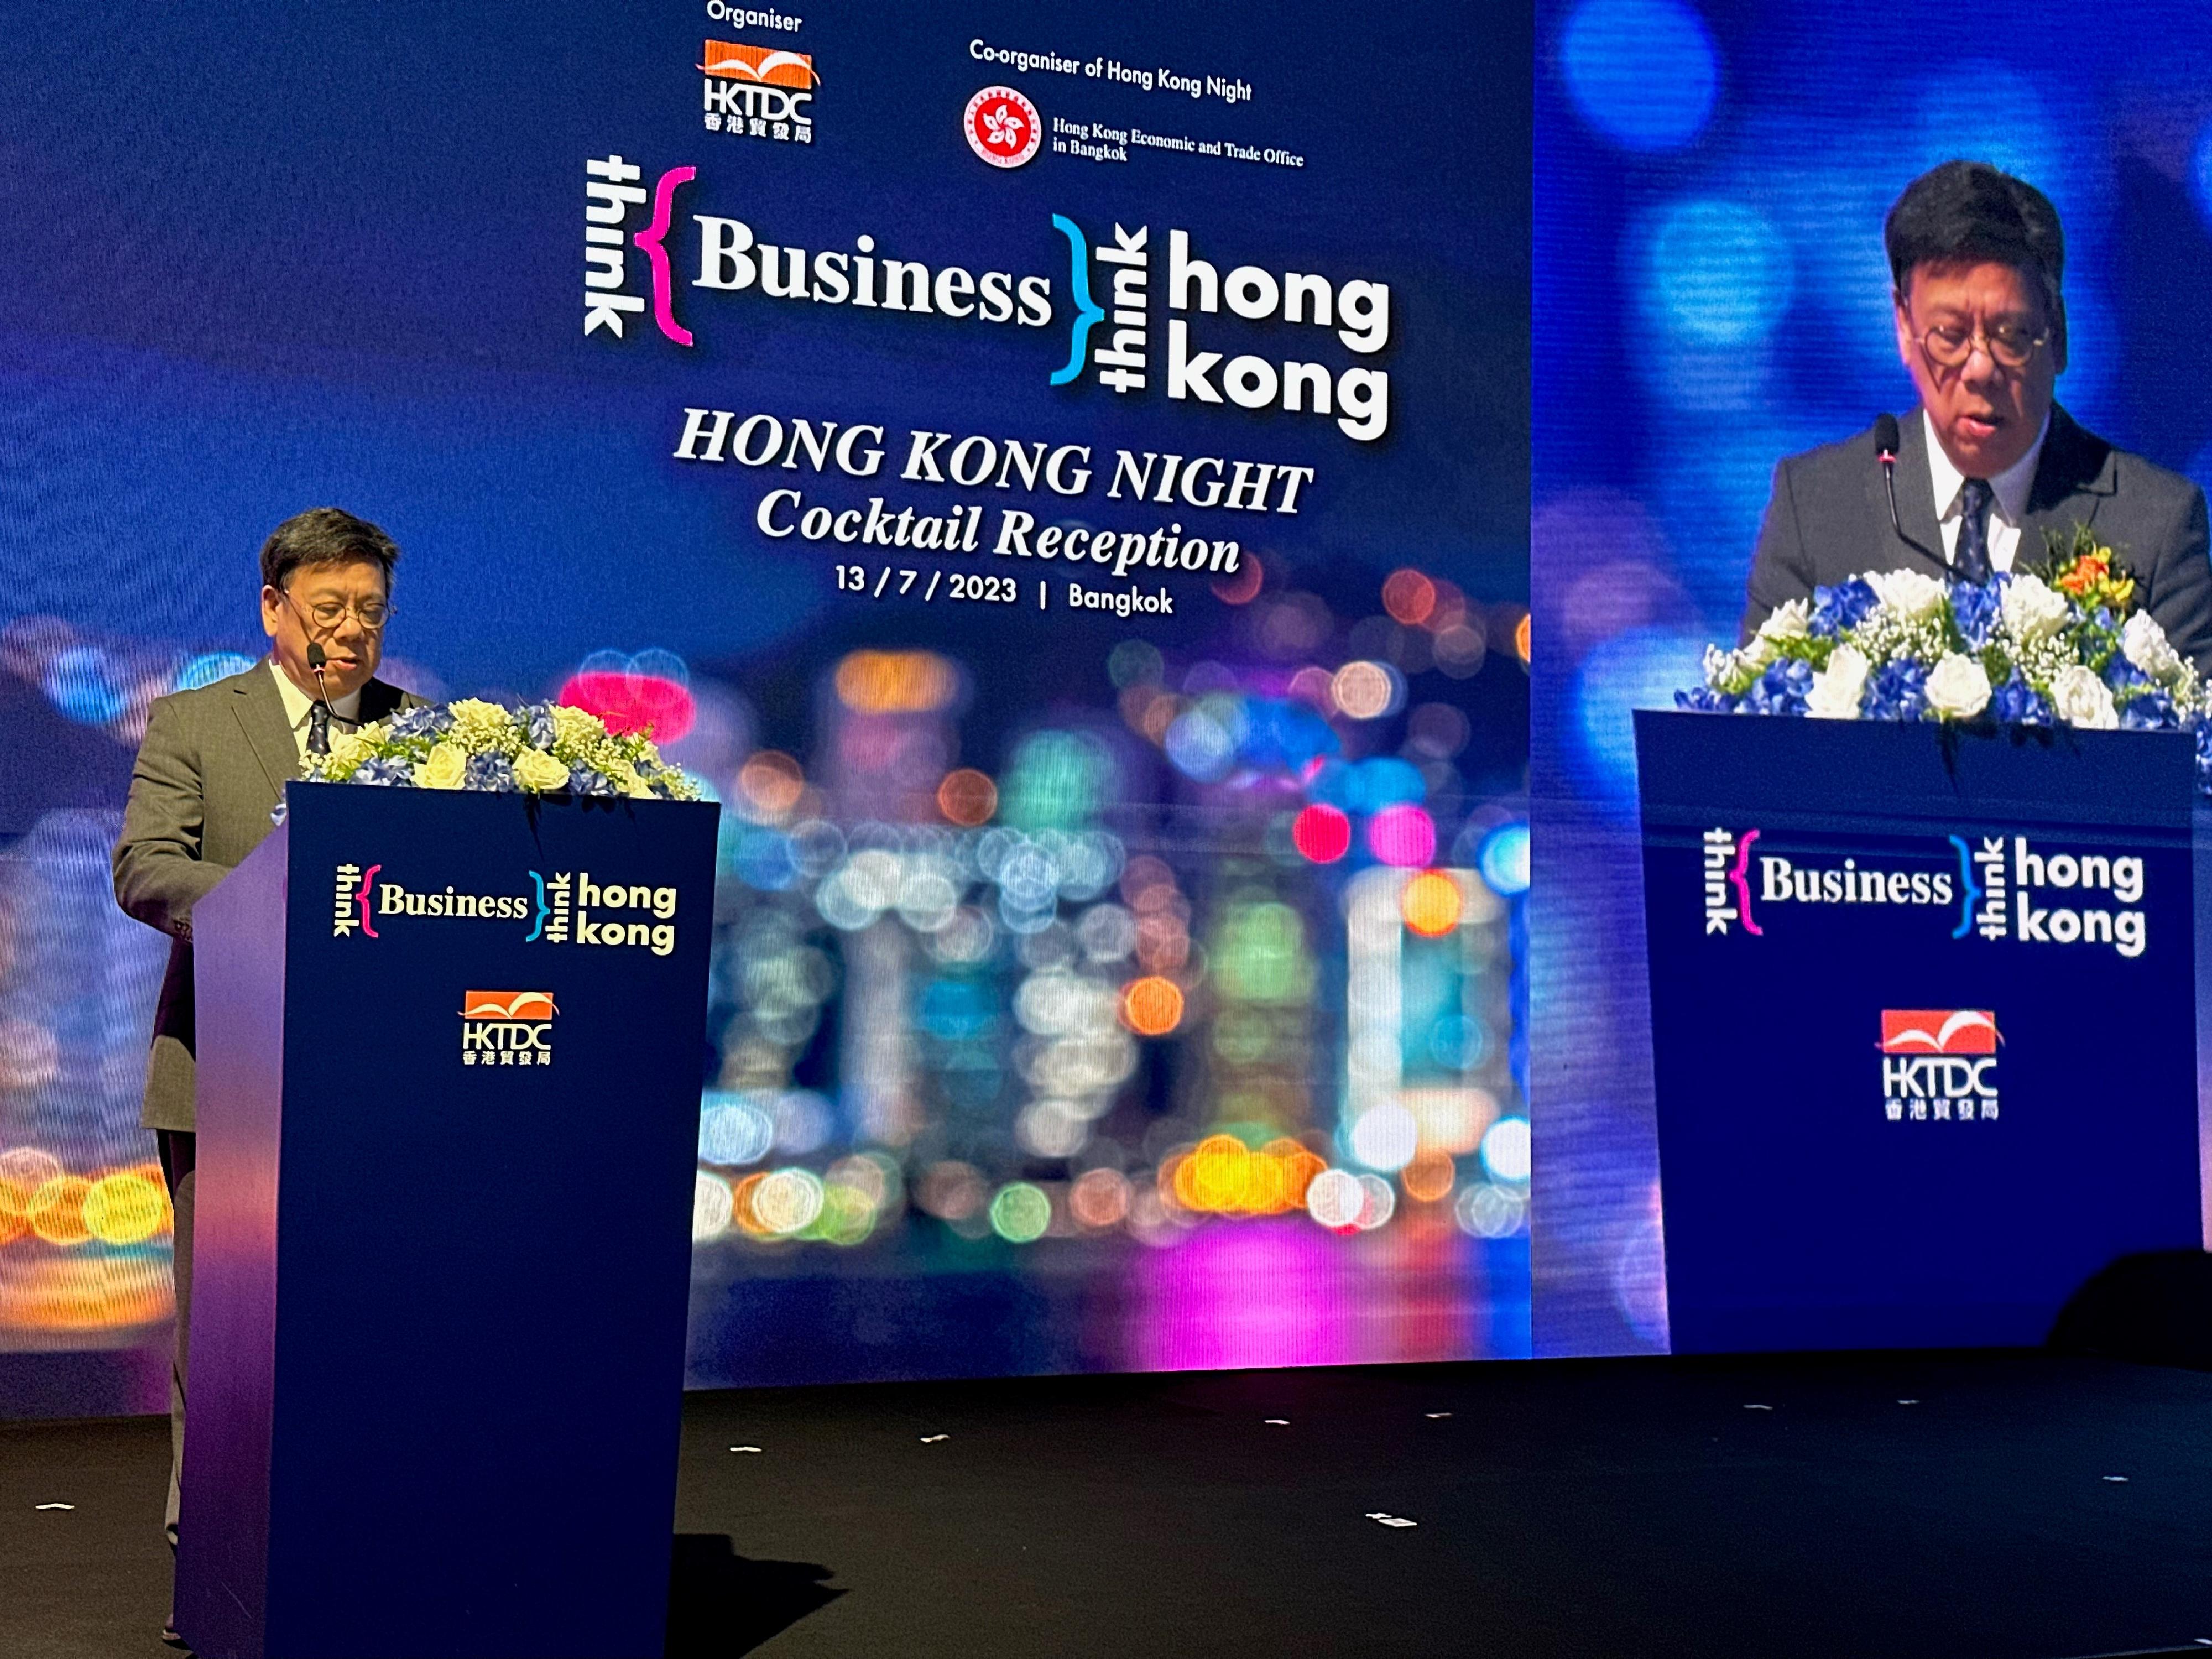 The Secretary for Commerce and Economic Development, Mr Algernon Yau, today (July 13) attended the reception of Think Business, Think Hong Kong, a promotion event organised by the Hong Kong Trade Development Council in Bangkok, Thailand. Photo shows Mr Yau delivering a speech at the reception.